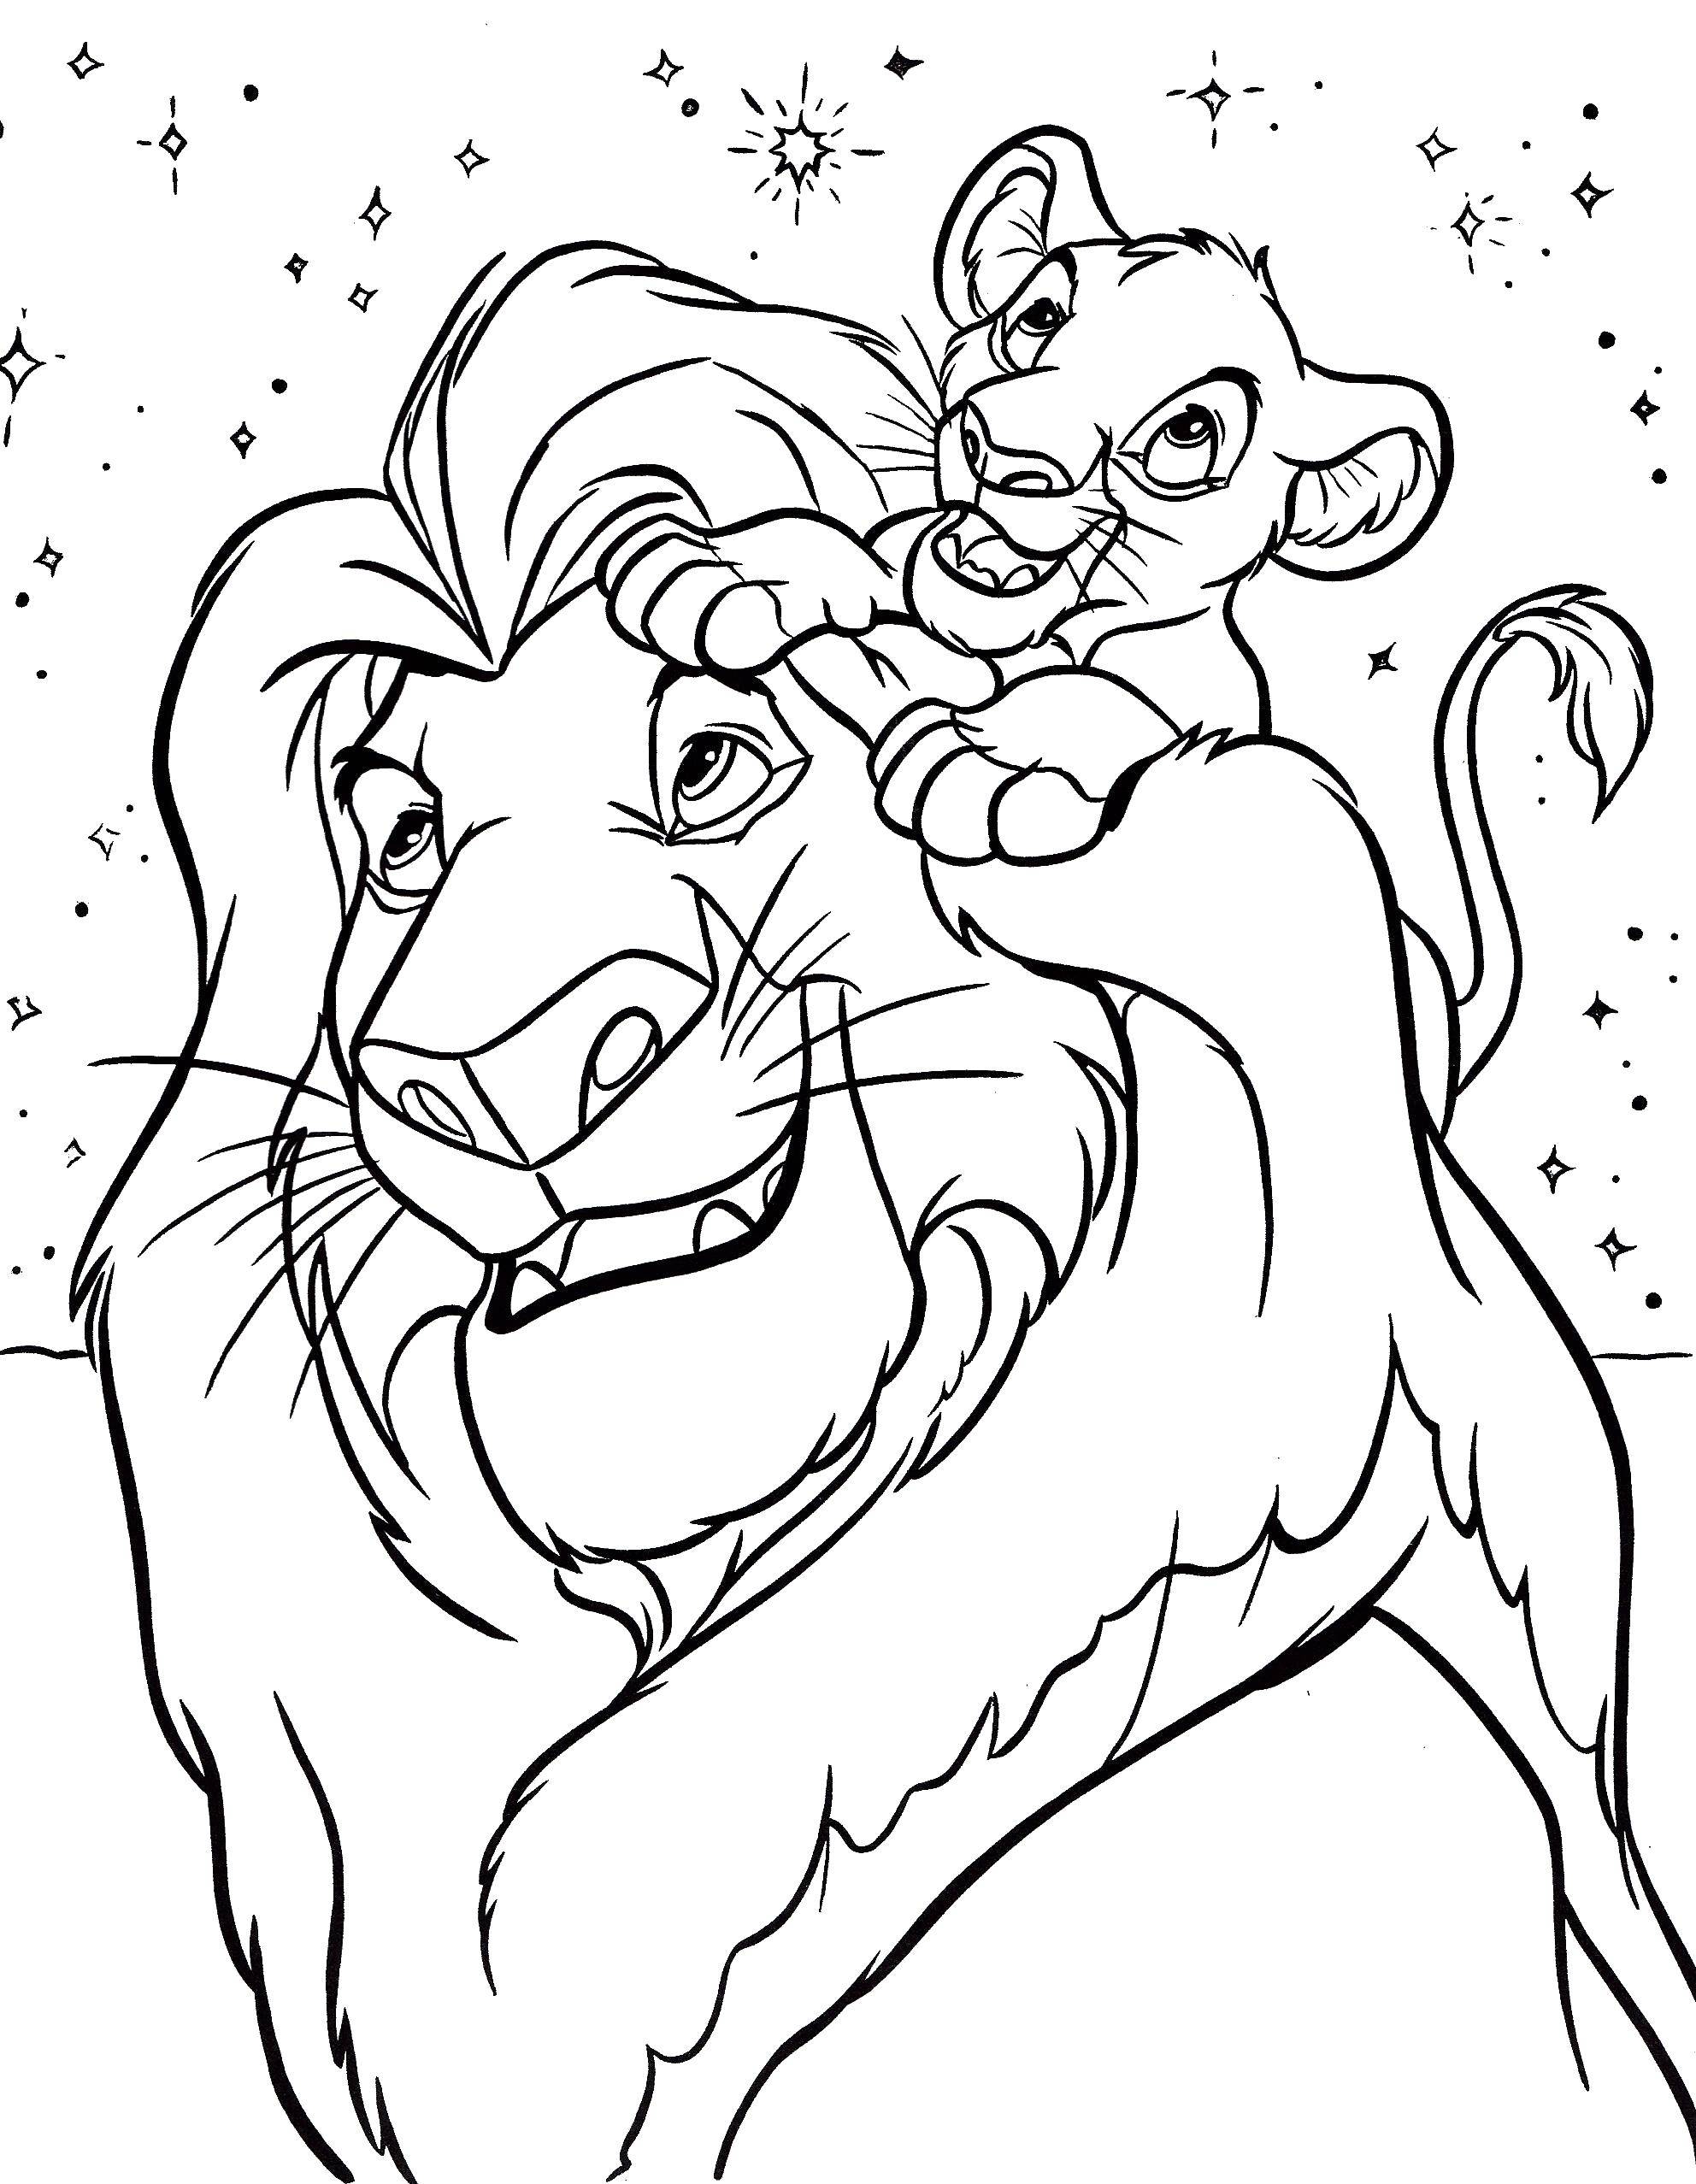 Coloring Mufasa and Simba. Category Disney coloring pages. Tags:  lion, lion cub, Simba.